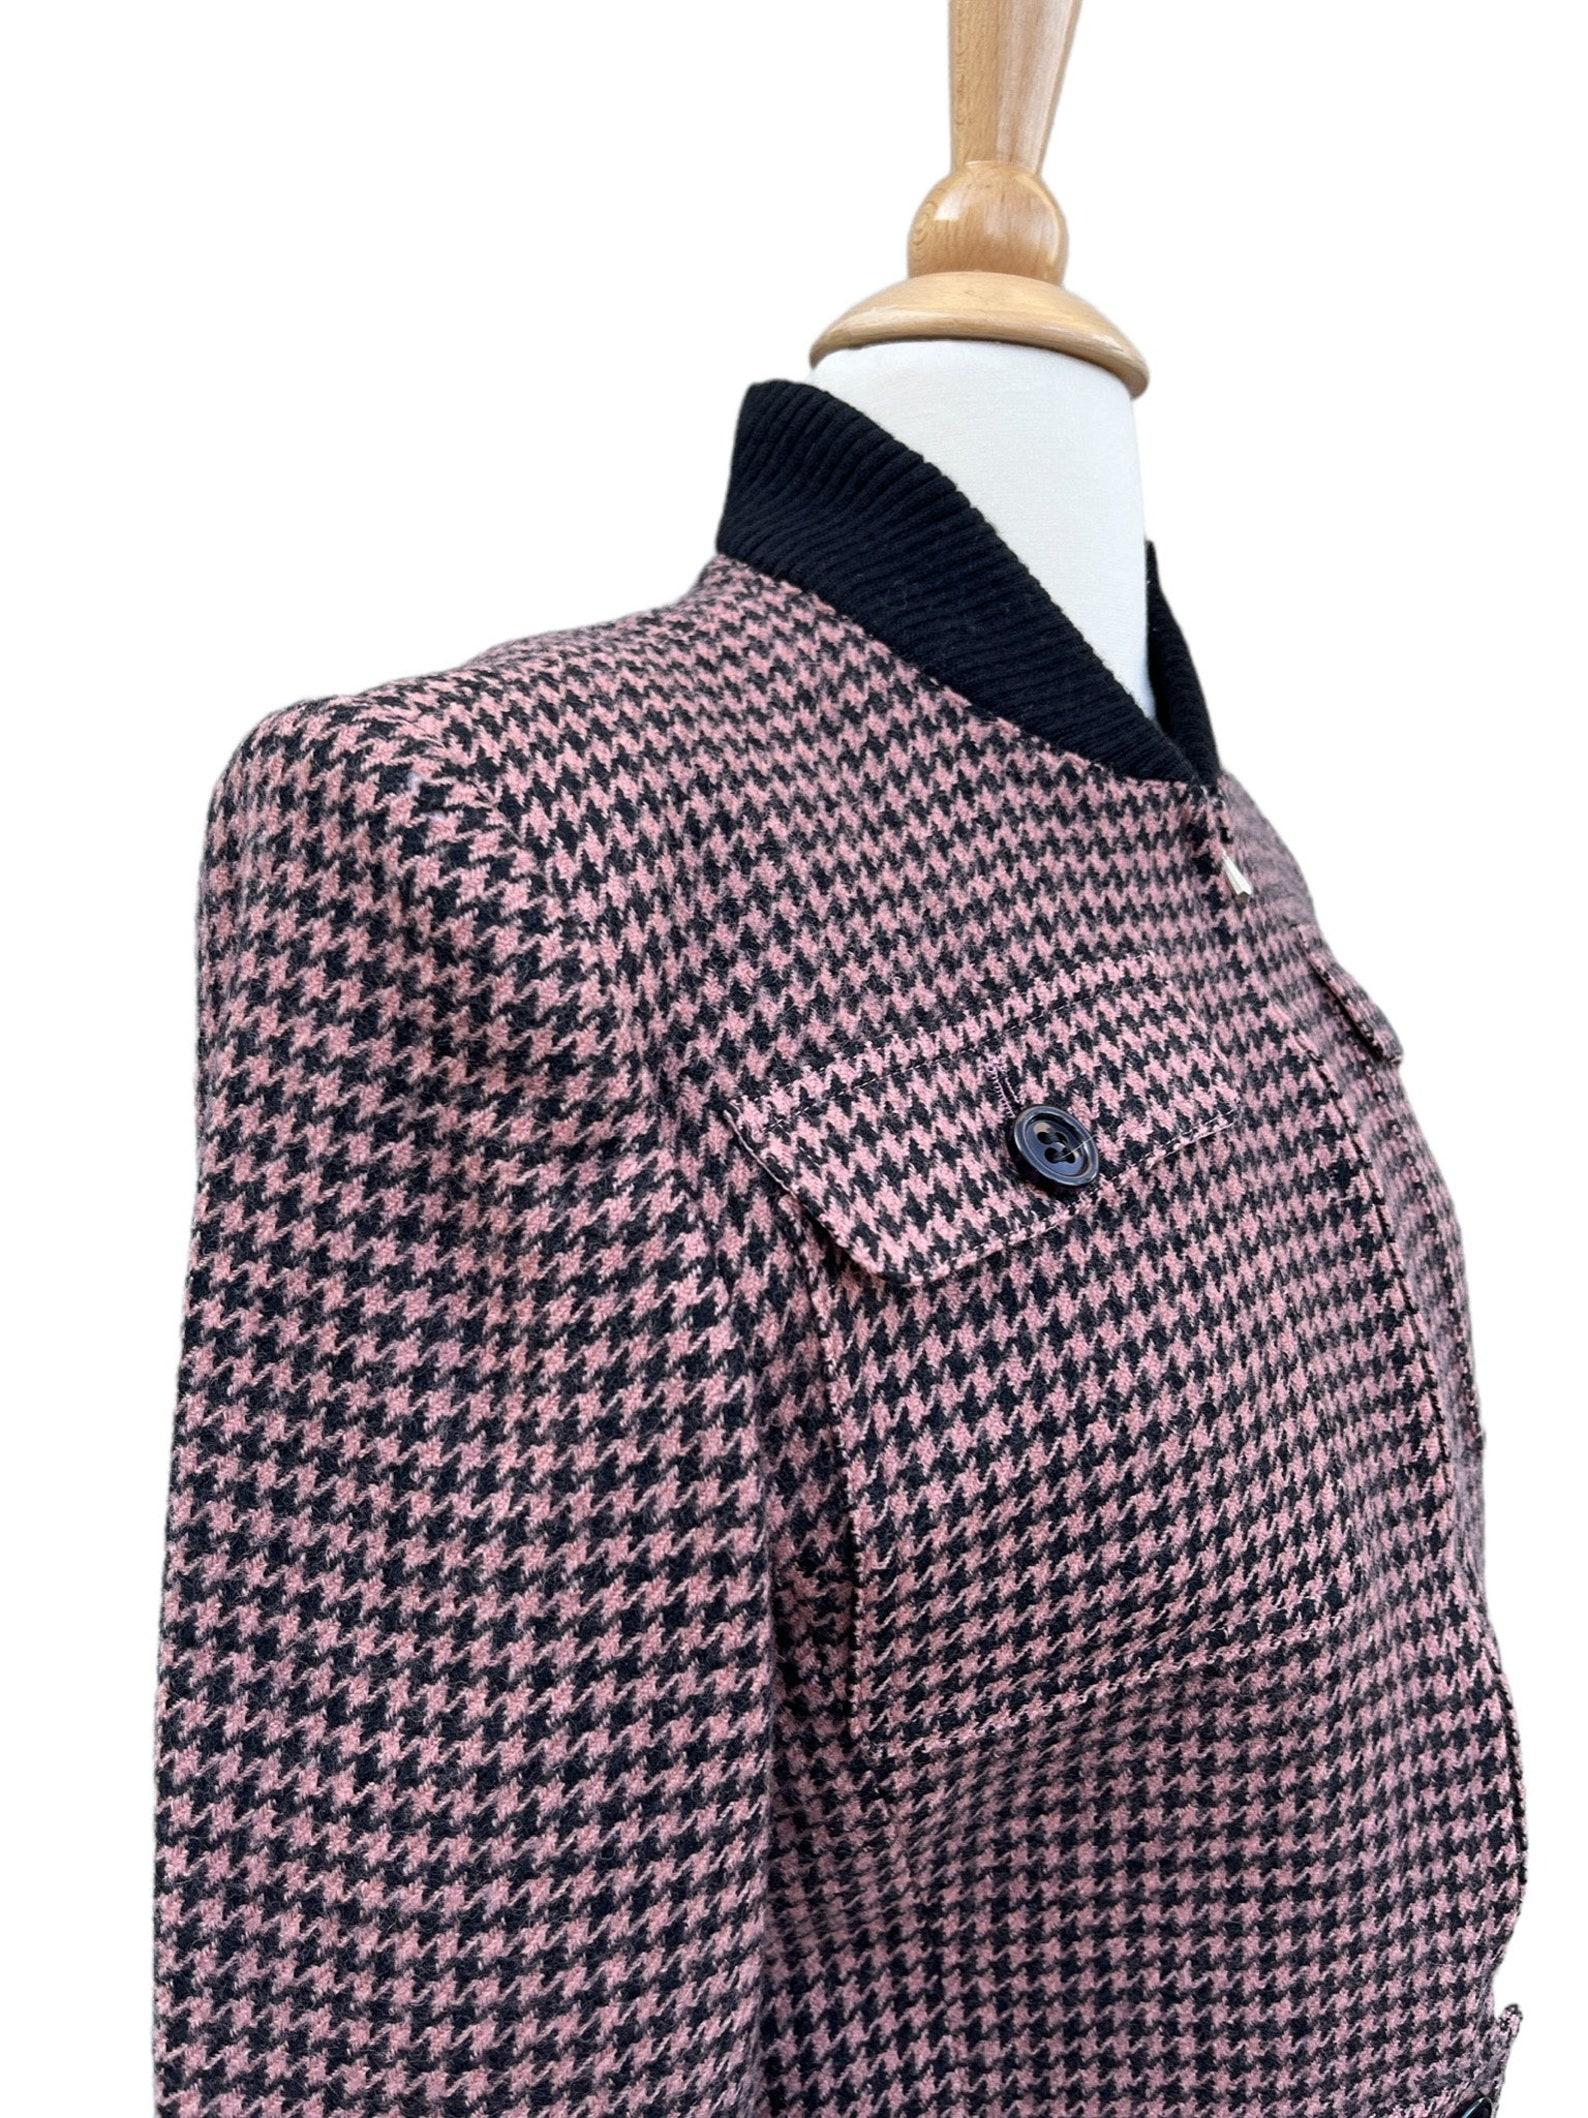 Guy Laroche Houndstooth Jacket, Circa 1980s For Sale 5